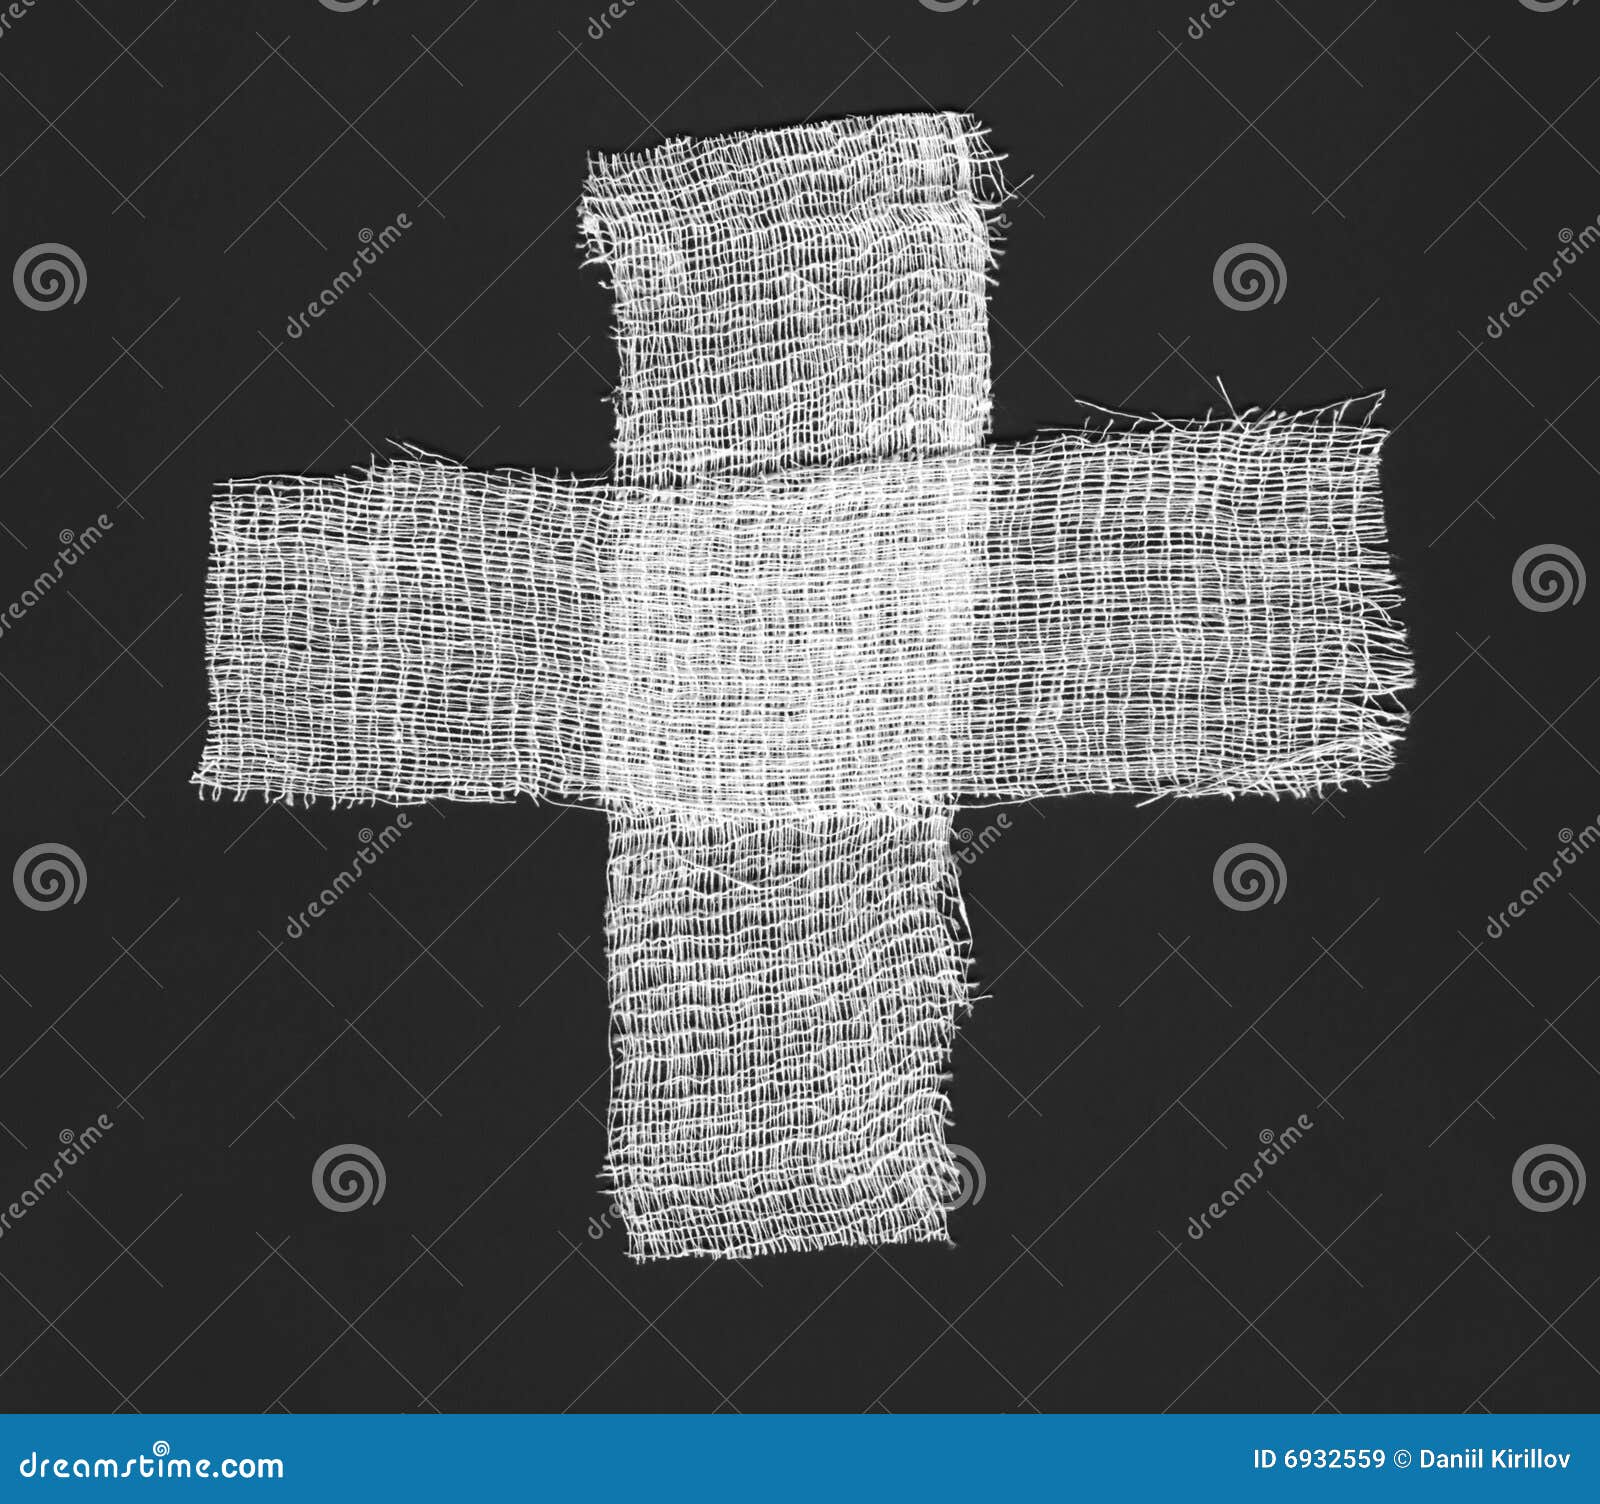 Two white bandages on black. Two white bandages forming a cross on black background